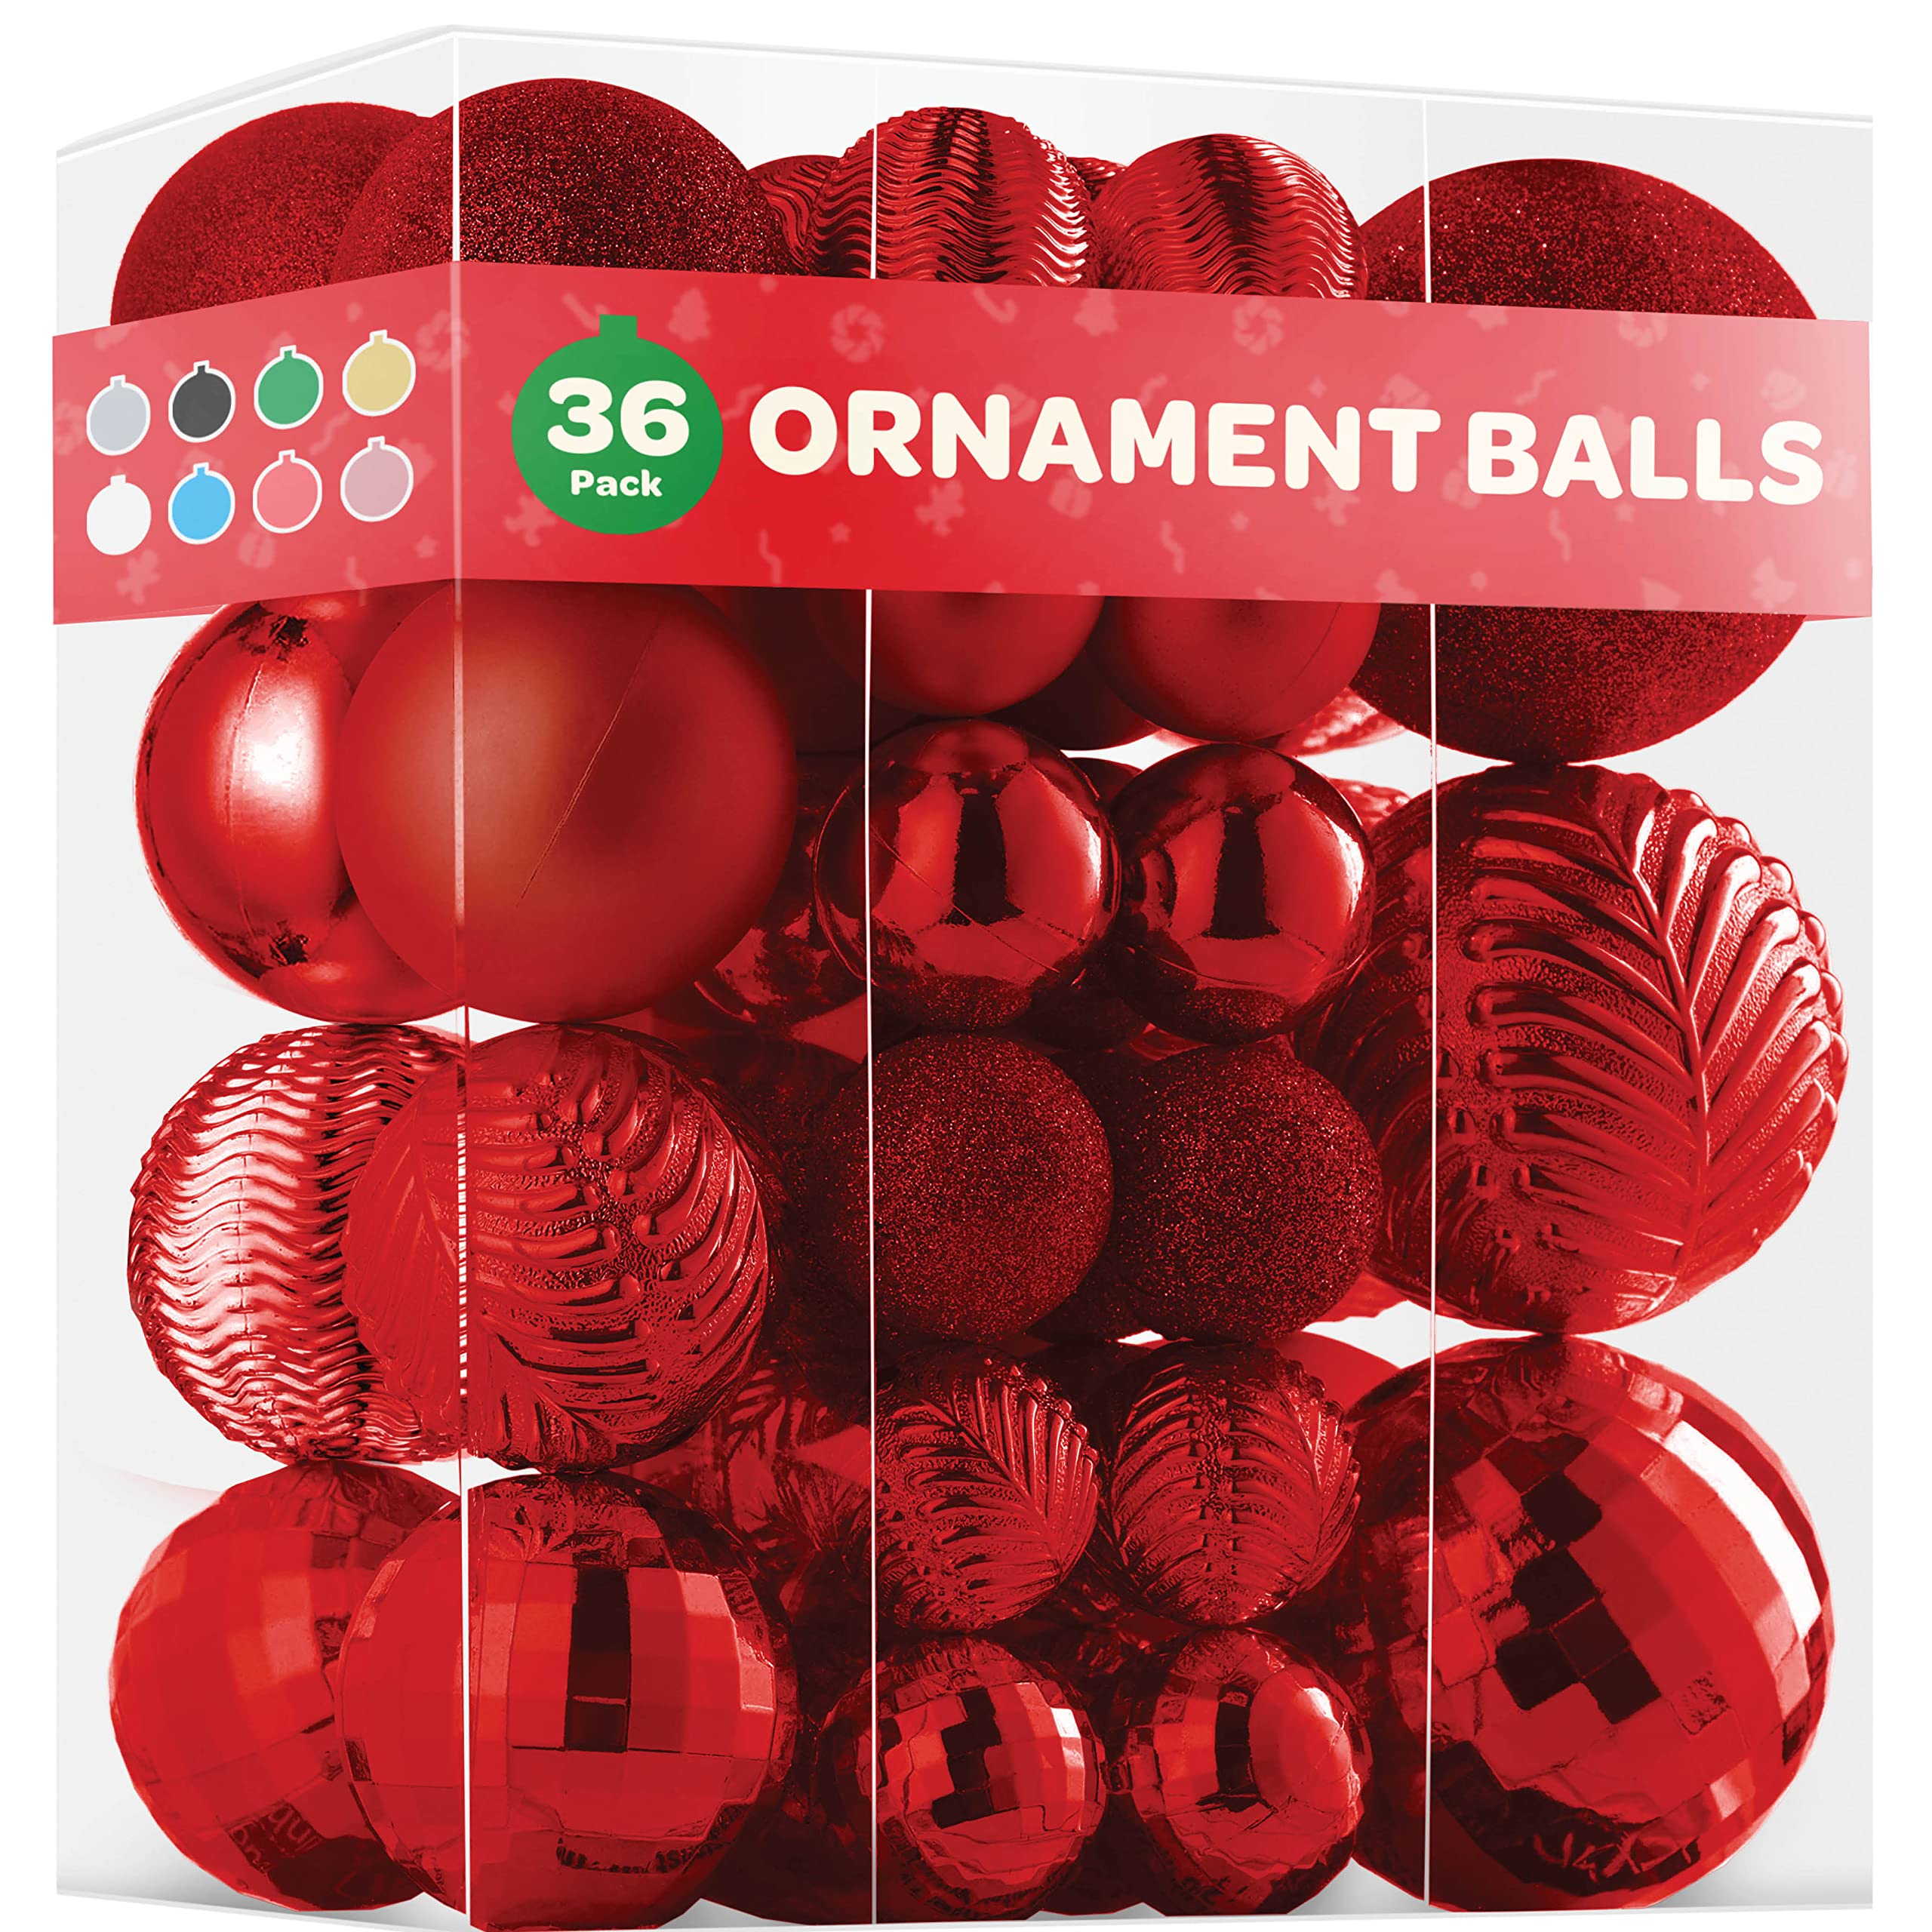 Christmas Ornaments Set of 36 - Beautiful [Wine-Red] Christmas Tree Decorations Ornaments Set - 6 Style Christmas Ball Ornaments - Shatterproof/Pre-Strung - for Holiday/Party/Decorations/DIY  - Like New